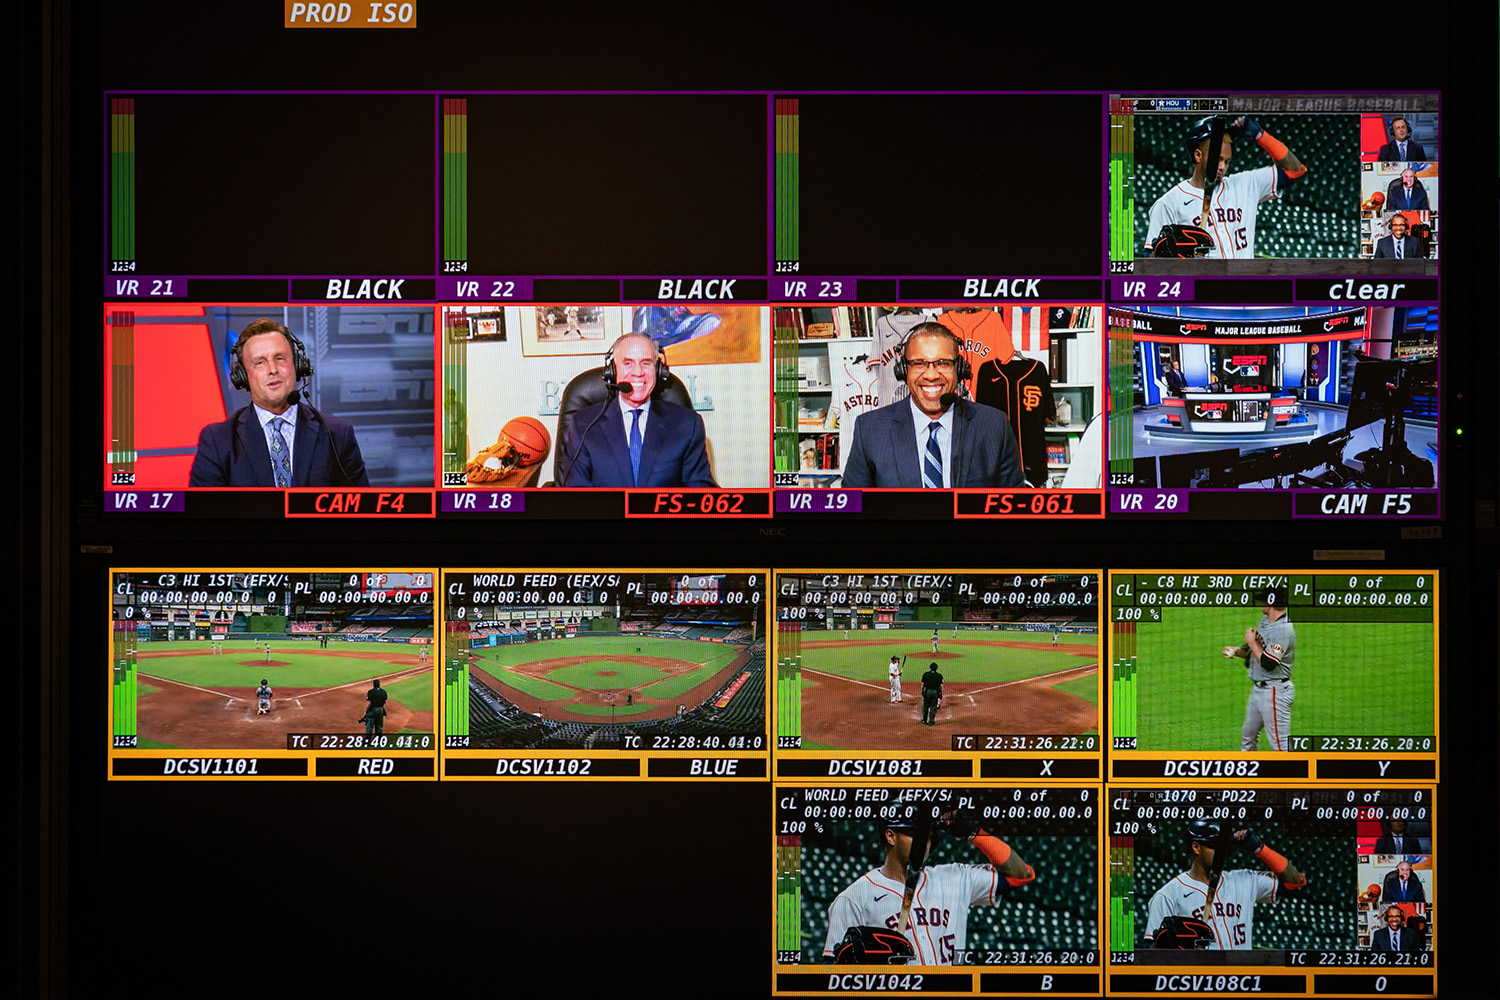 MLB Postseason ESPN Modifies REMI Model To Produce Up to 21 Wild Card Games in Four Days